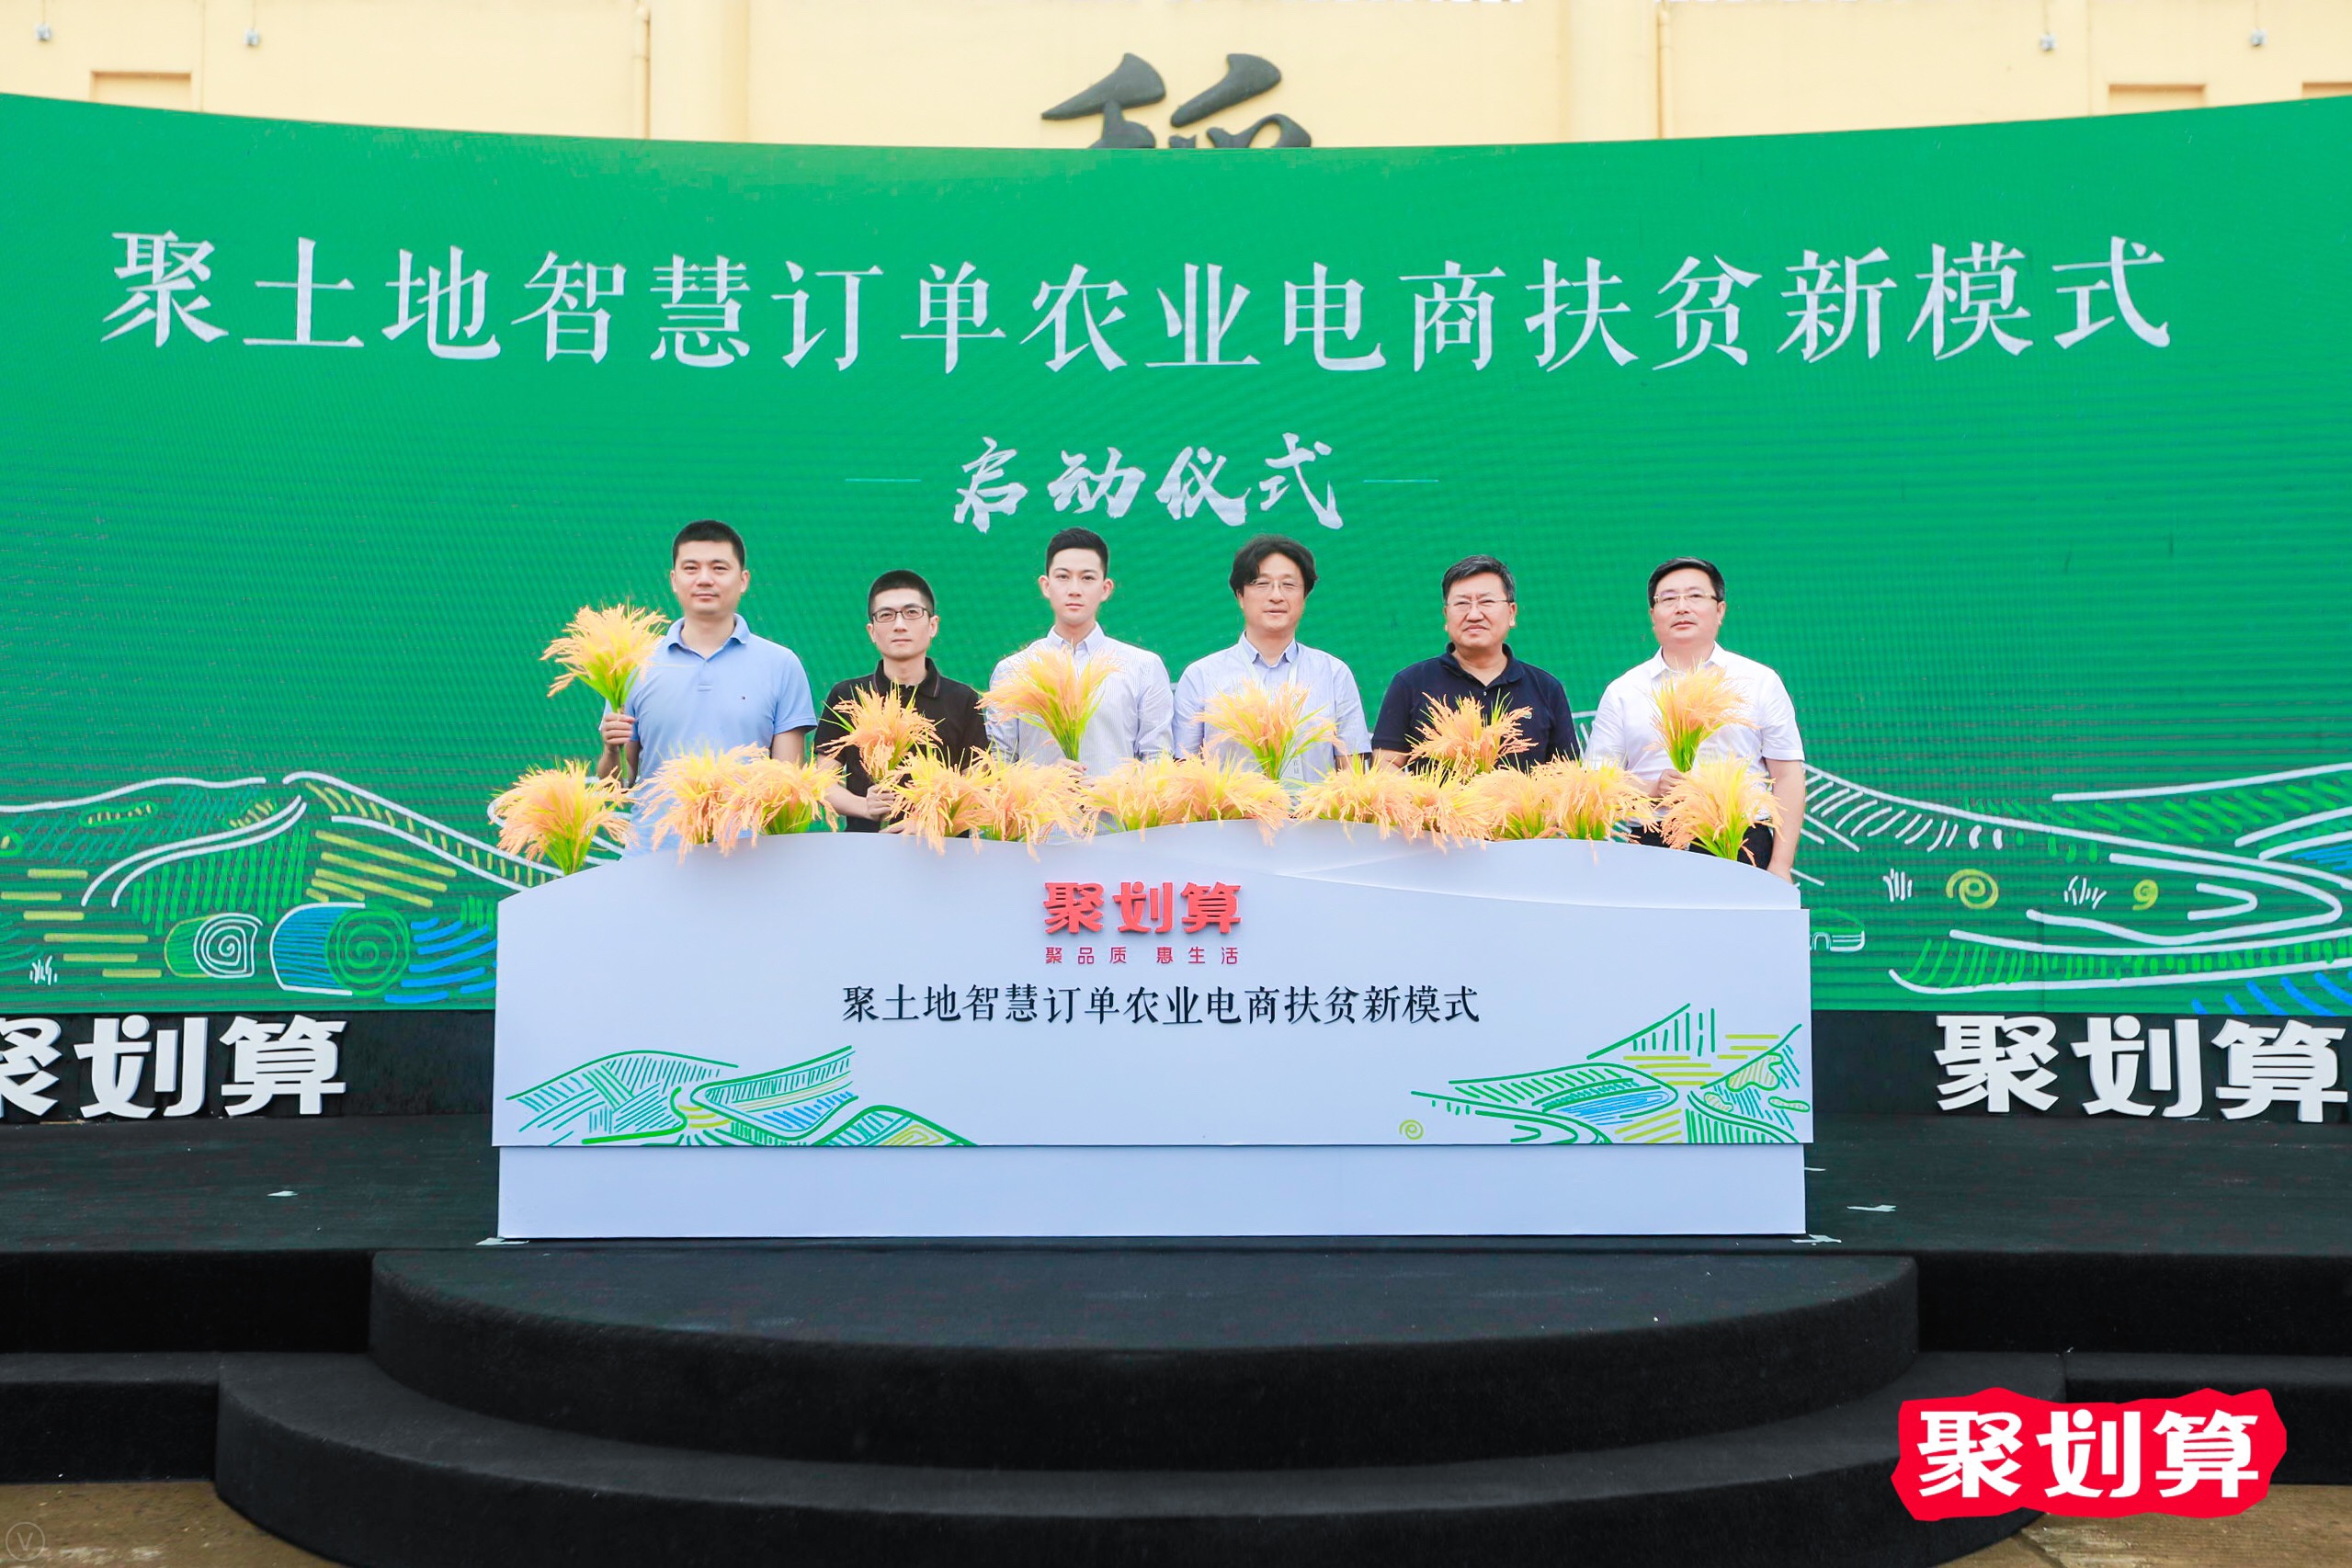 Alibaba launched the upgraded version of “Jutudi”